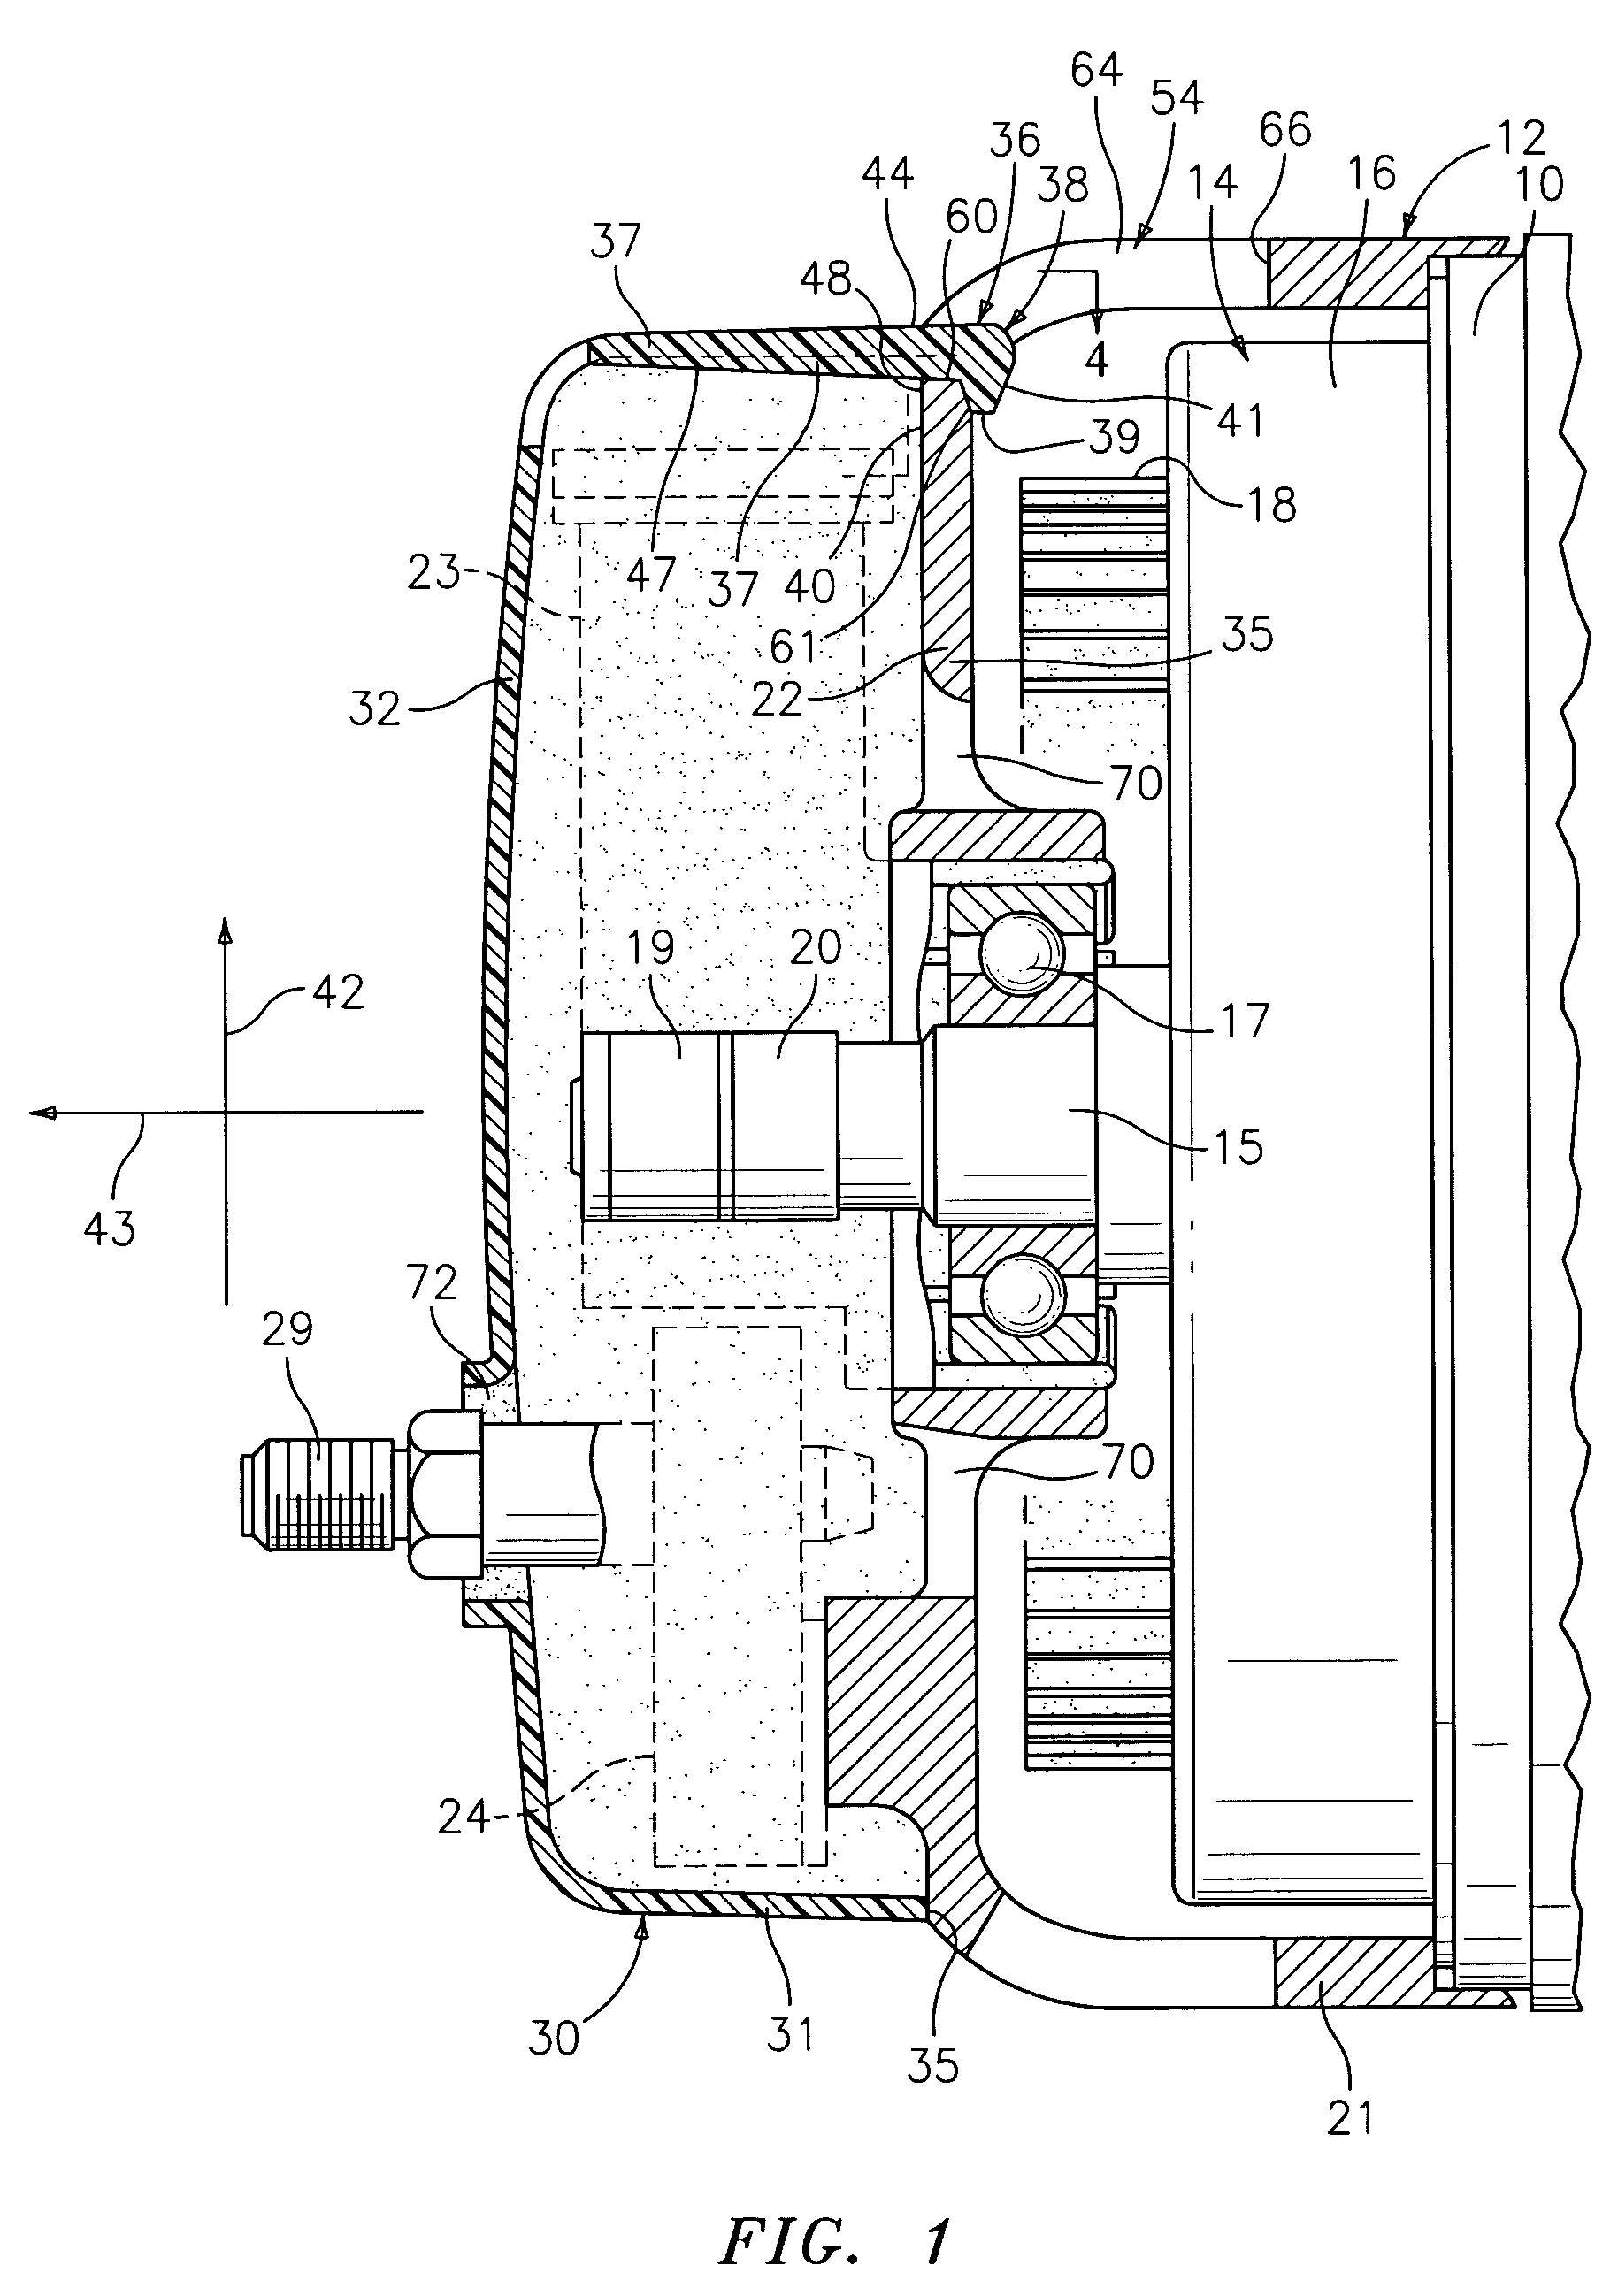 Method and apparatus for attachment of a cover for a dynamoelectric machine